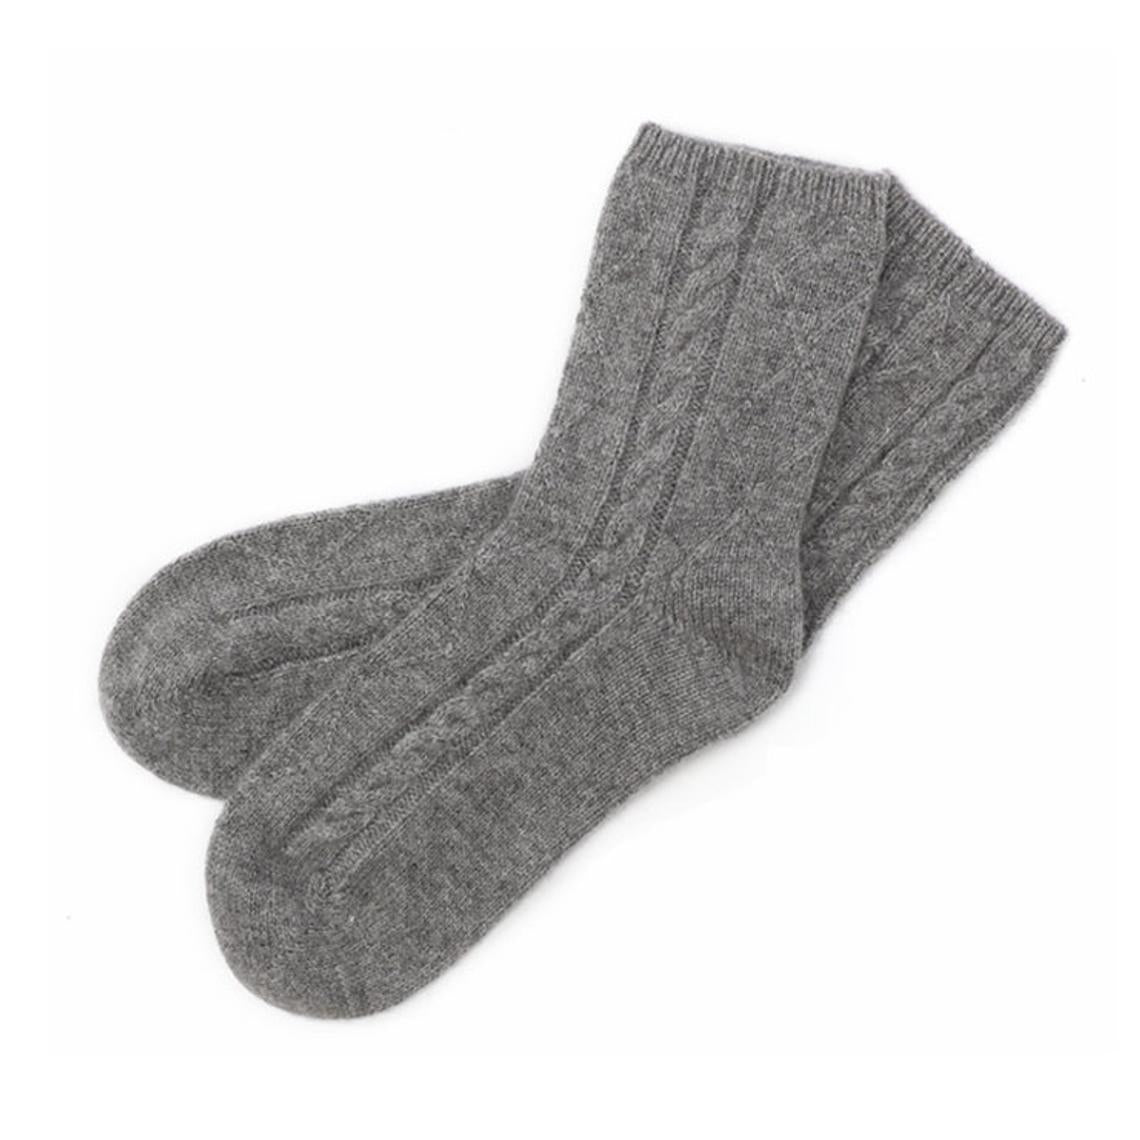 100% cashmere socks cable knit bed sock women grey heather